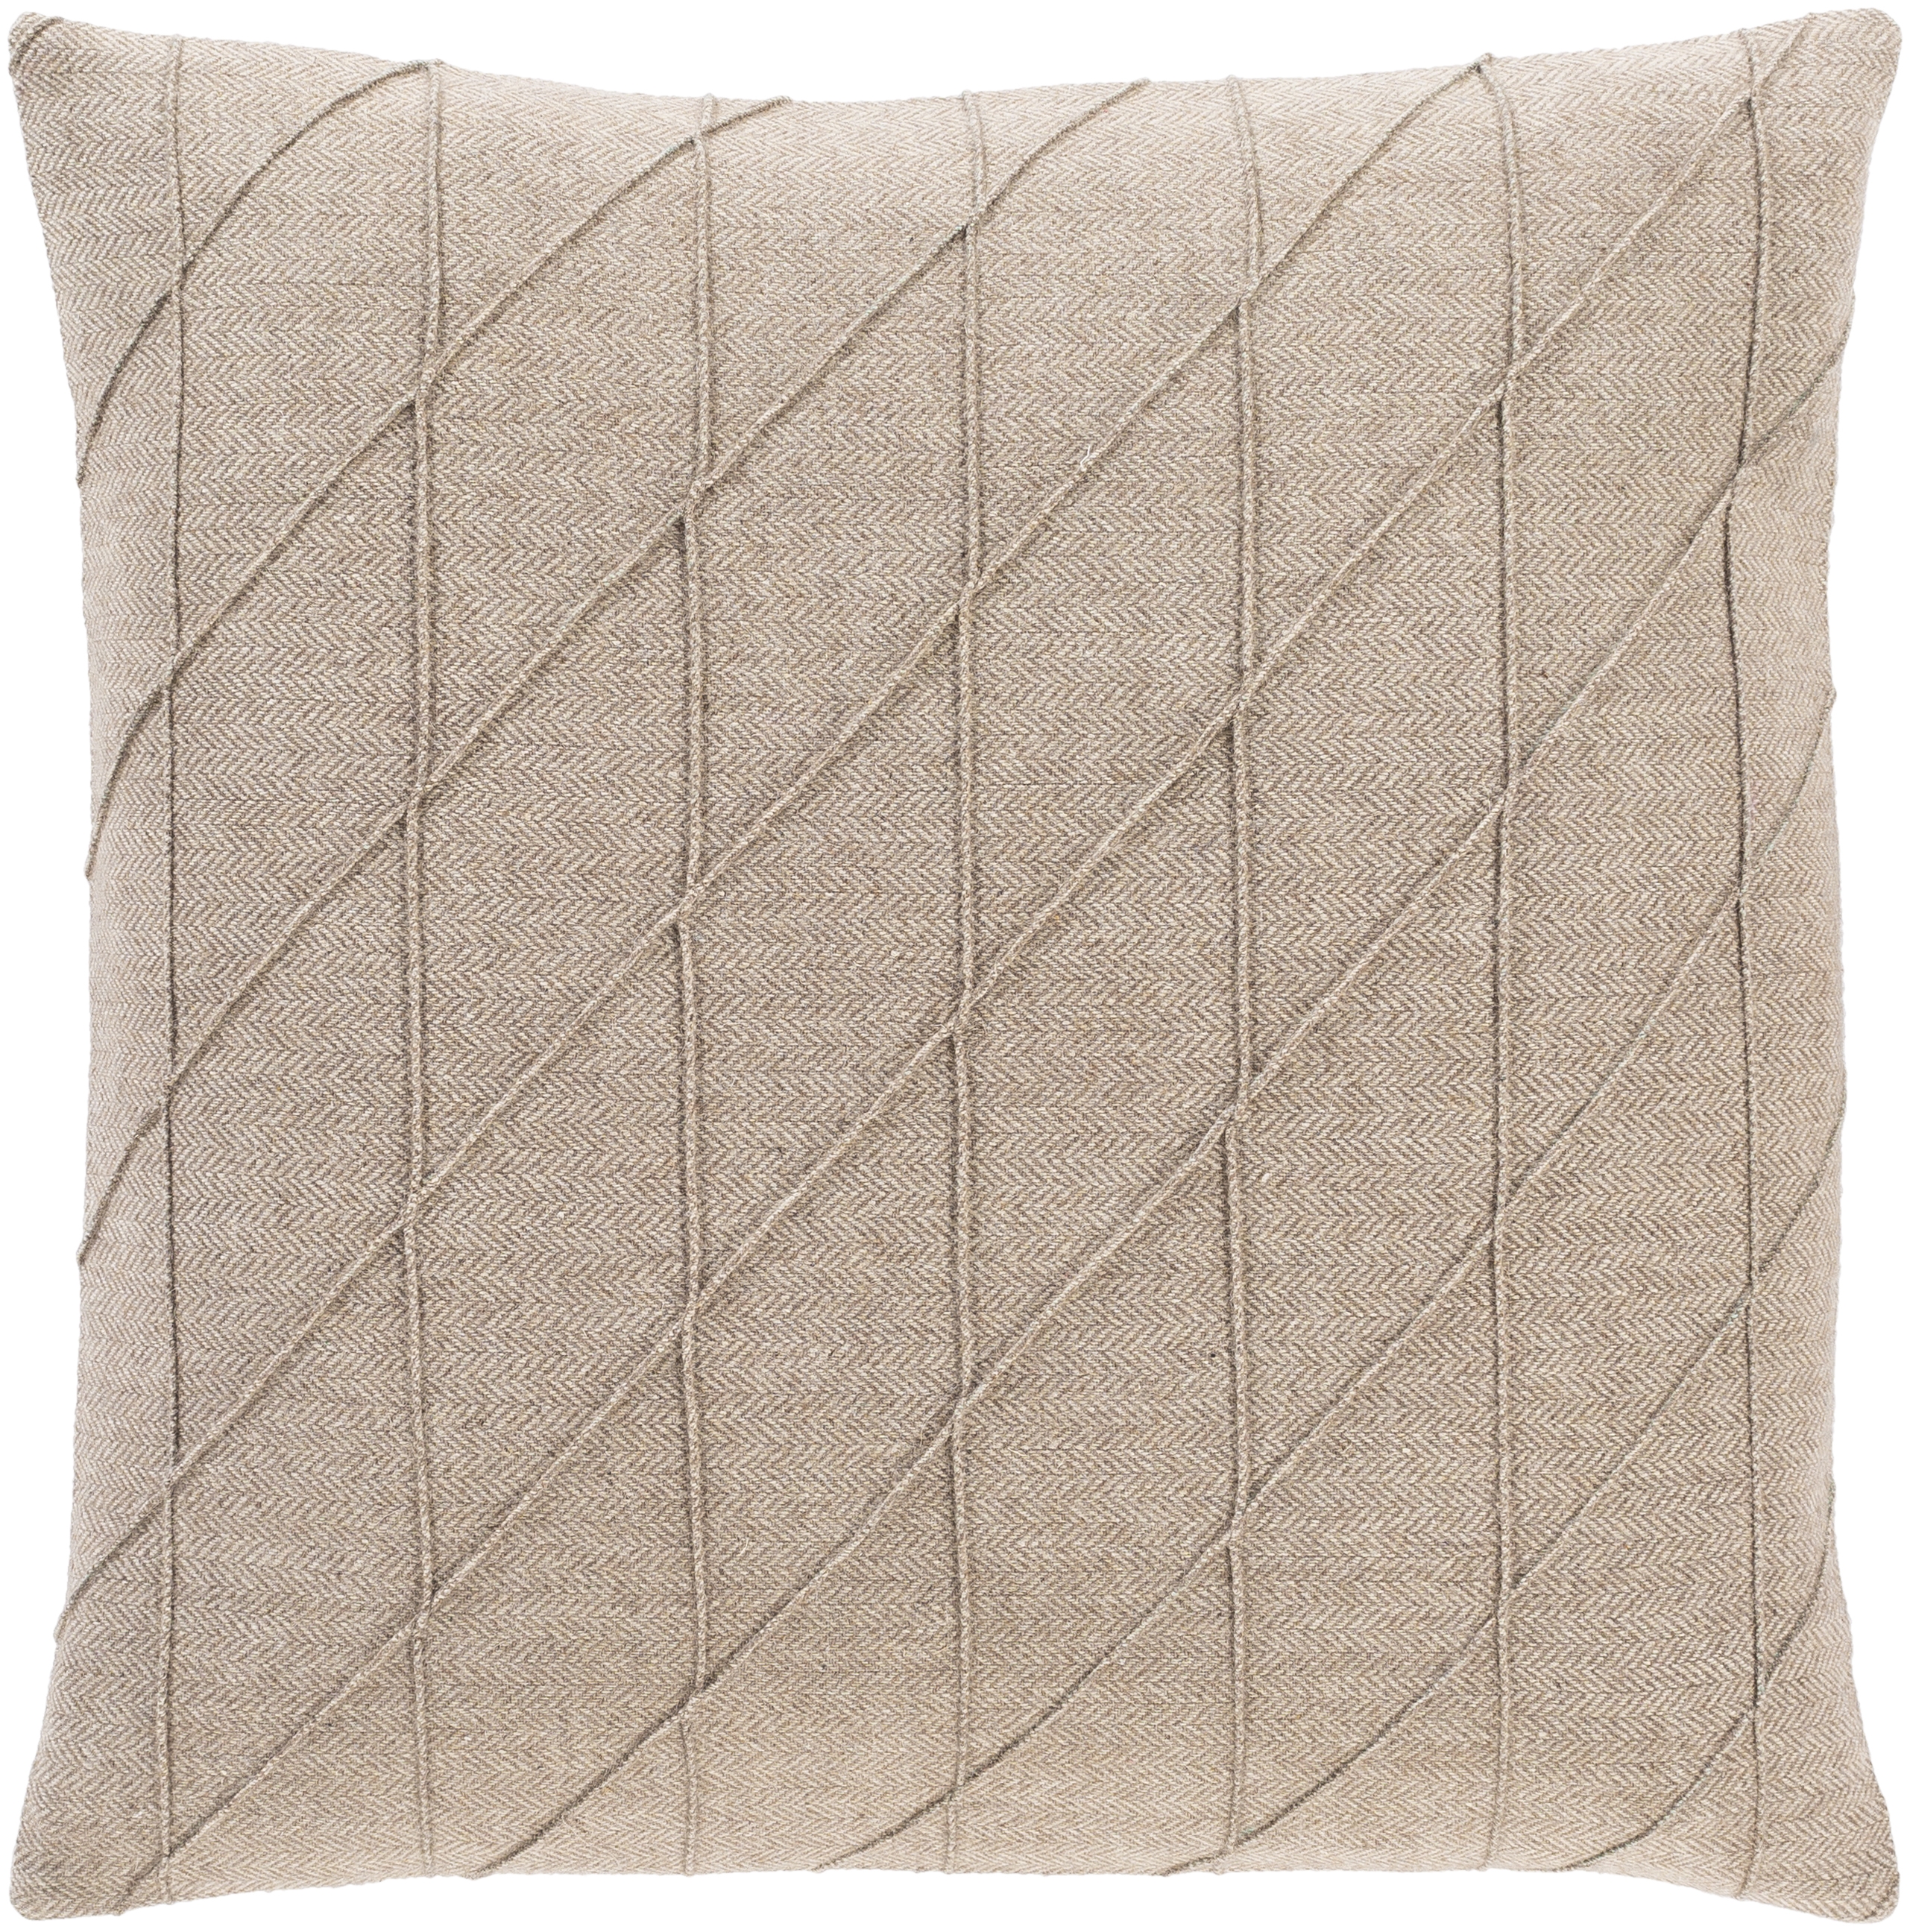 Brenley Throw Pillow, 18" x 18", with down insert - Image 0